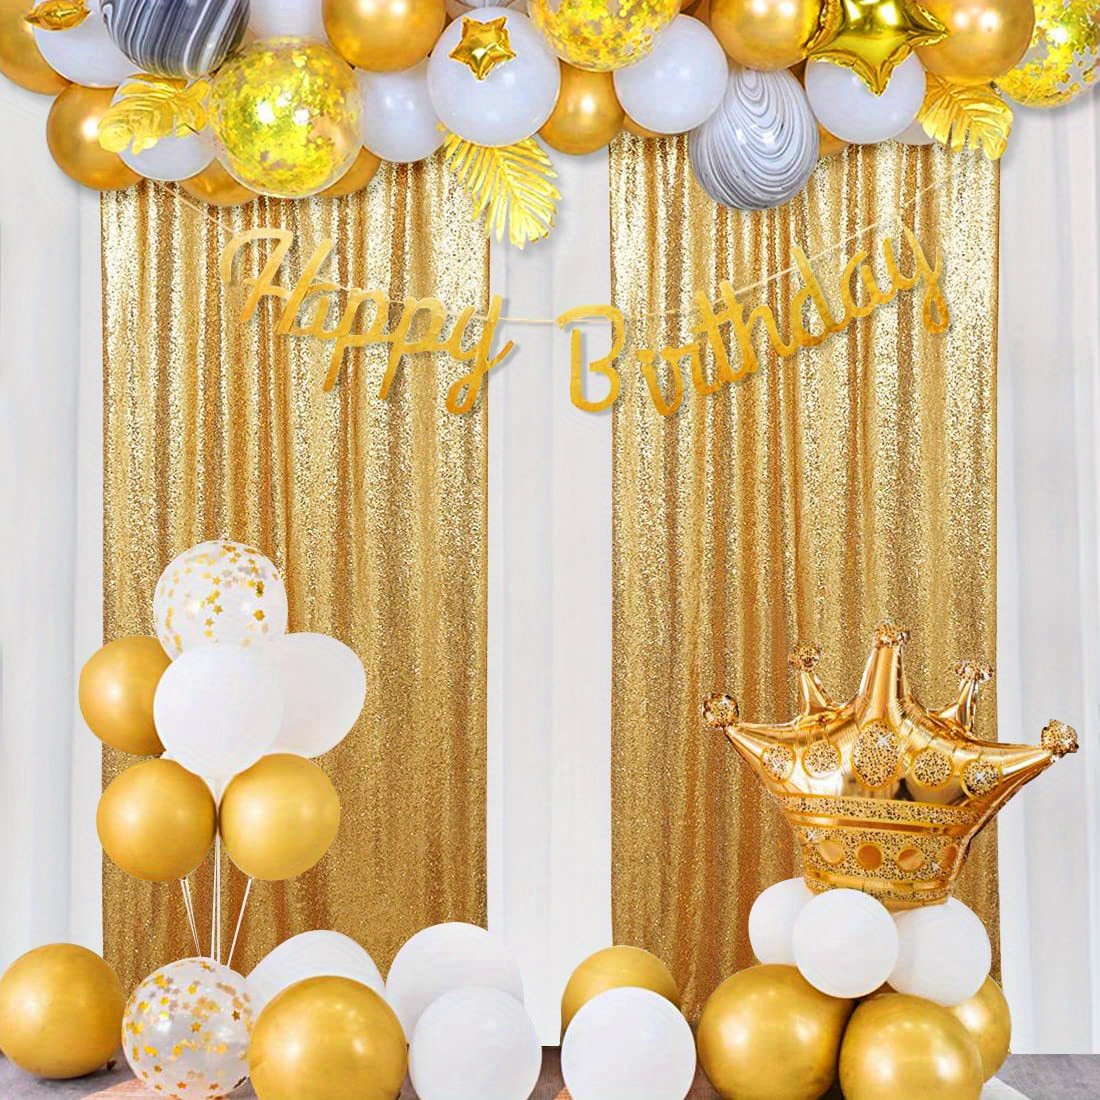 Hot High Quality Wedding Backdrop Curtain Angle Wings Sequined